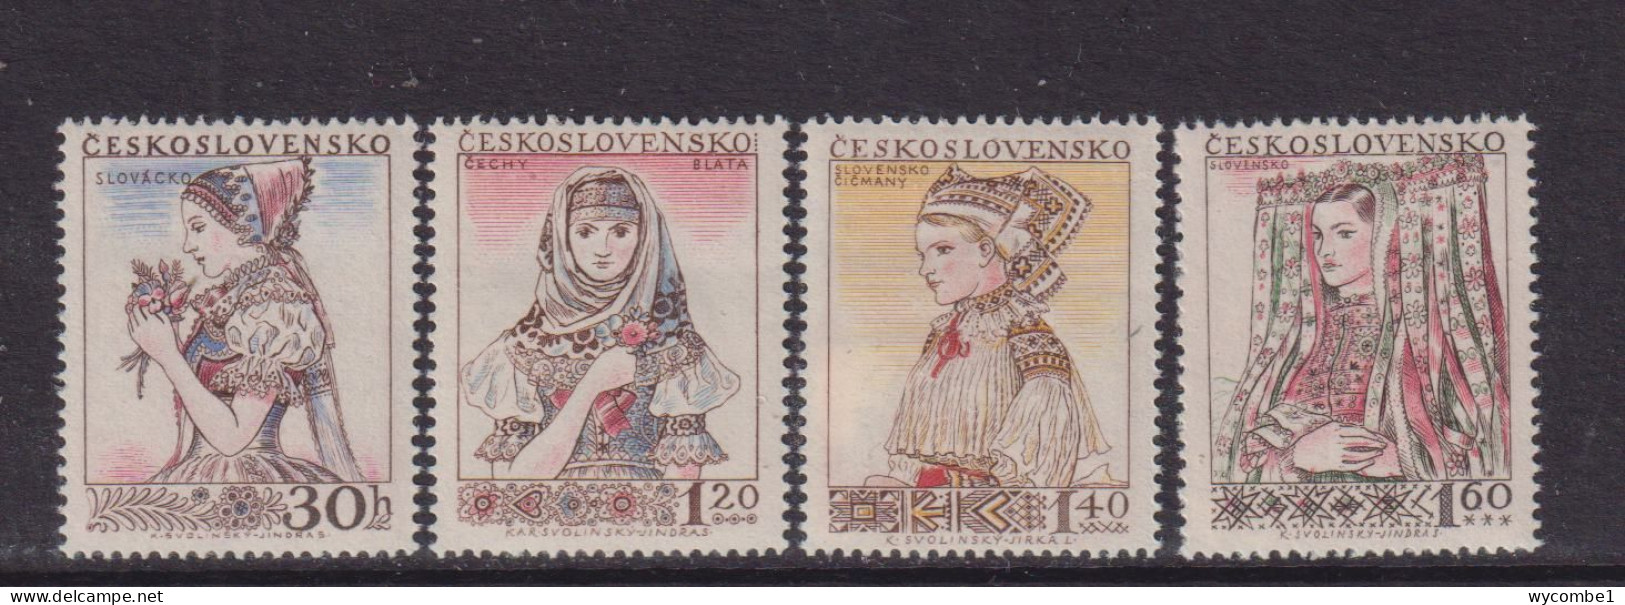 CZECHOSLOVAKIA  - 1956  National Costumes Set  Never Hinged Mint - Unused Stamps